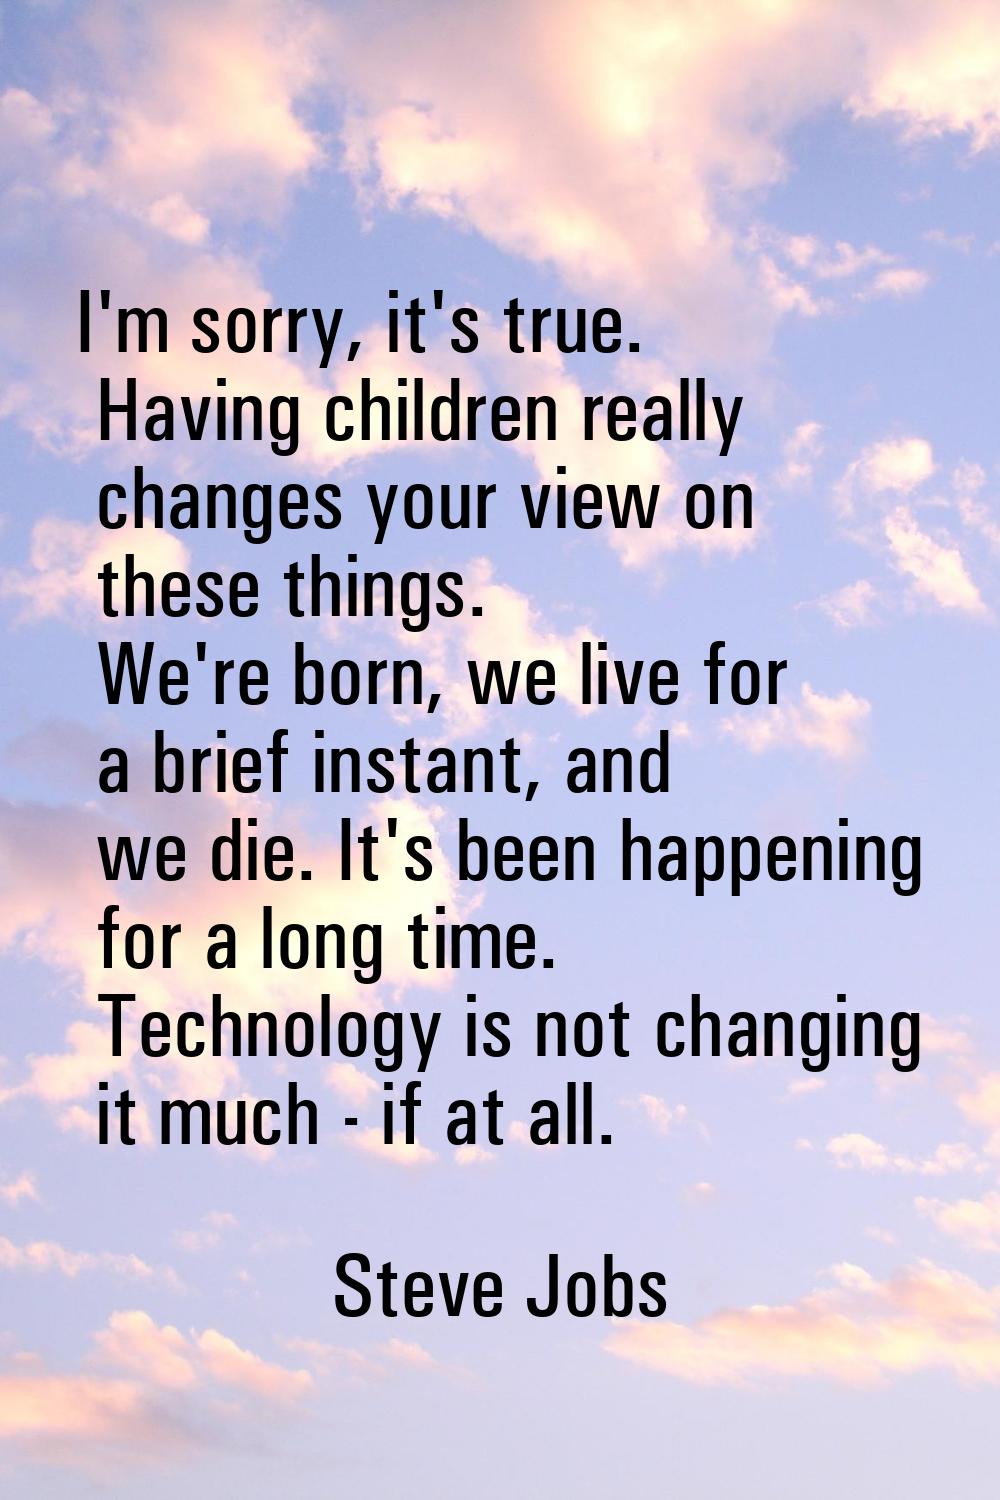 I'm sorry, it's true. Having children really changes your view on these things. We're born, we live